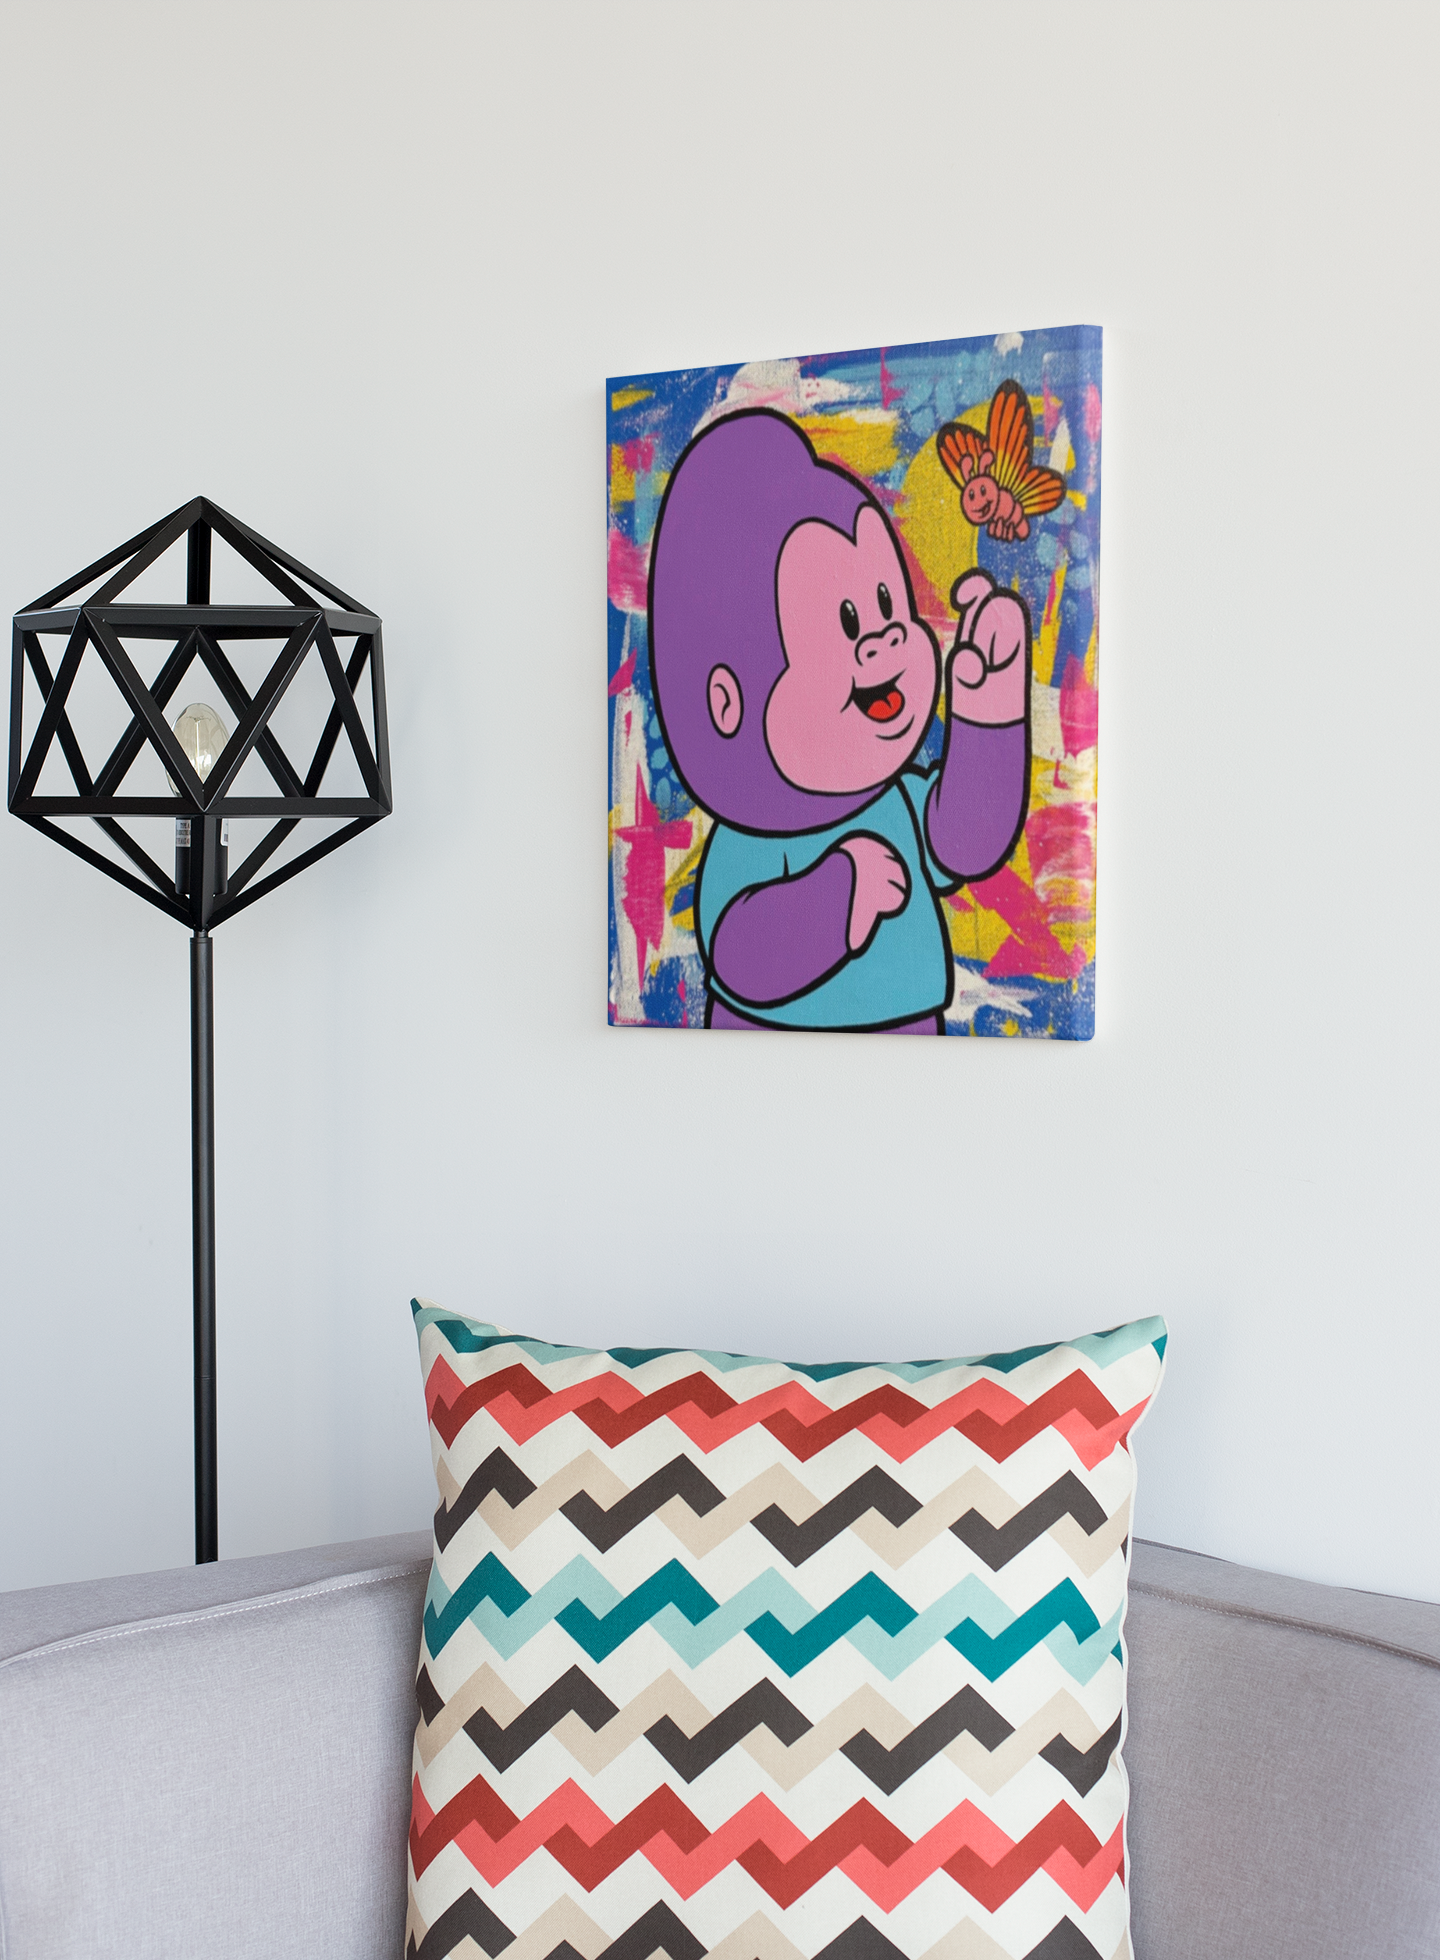 A blind box and art toy store: Arlo's Playdate - Fluttering Friend by Prime, featuring a monkey and butterfly painting on a wall, a cartoon monkey, and a zigzag pattern pillow.